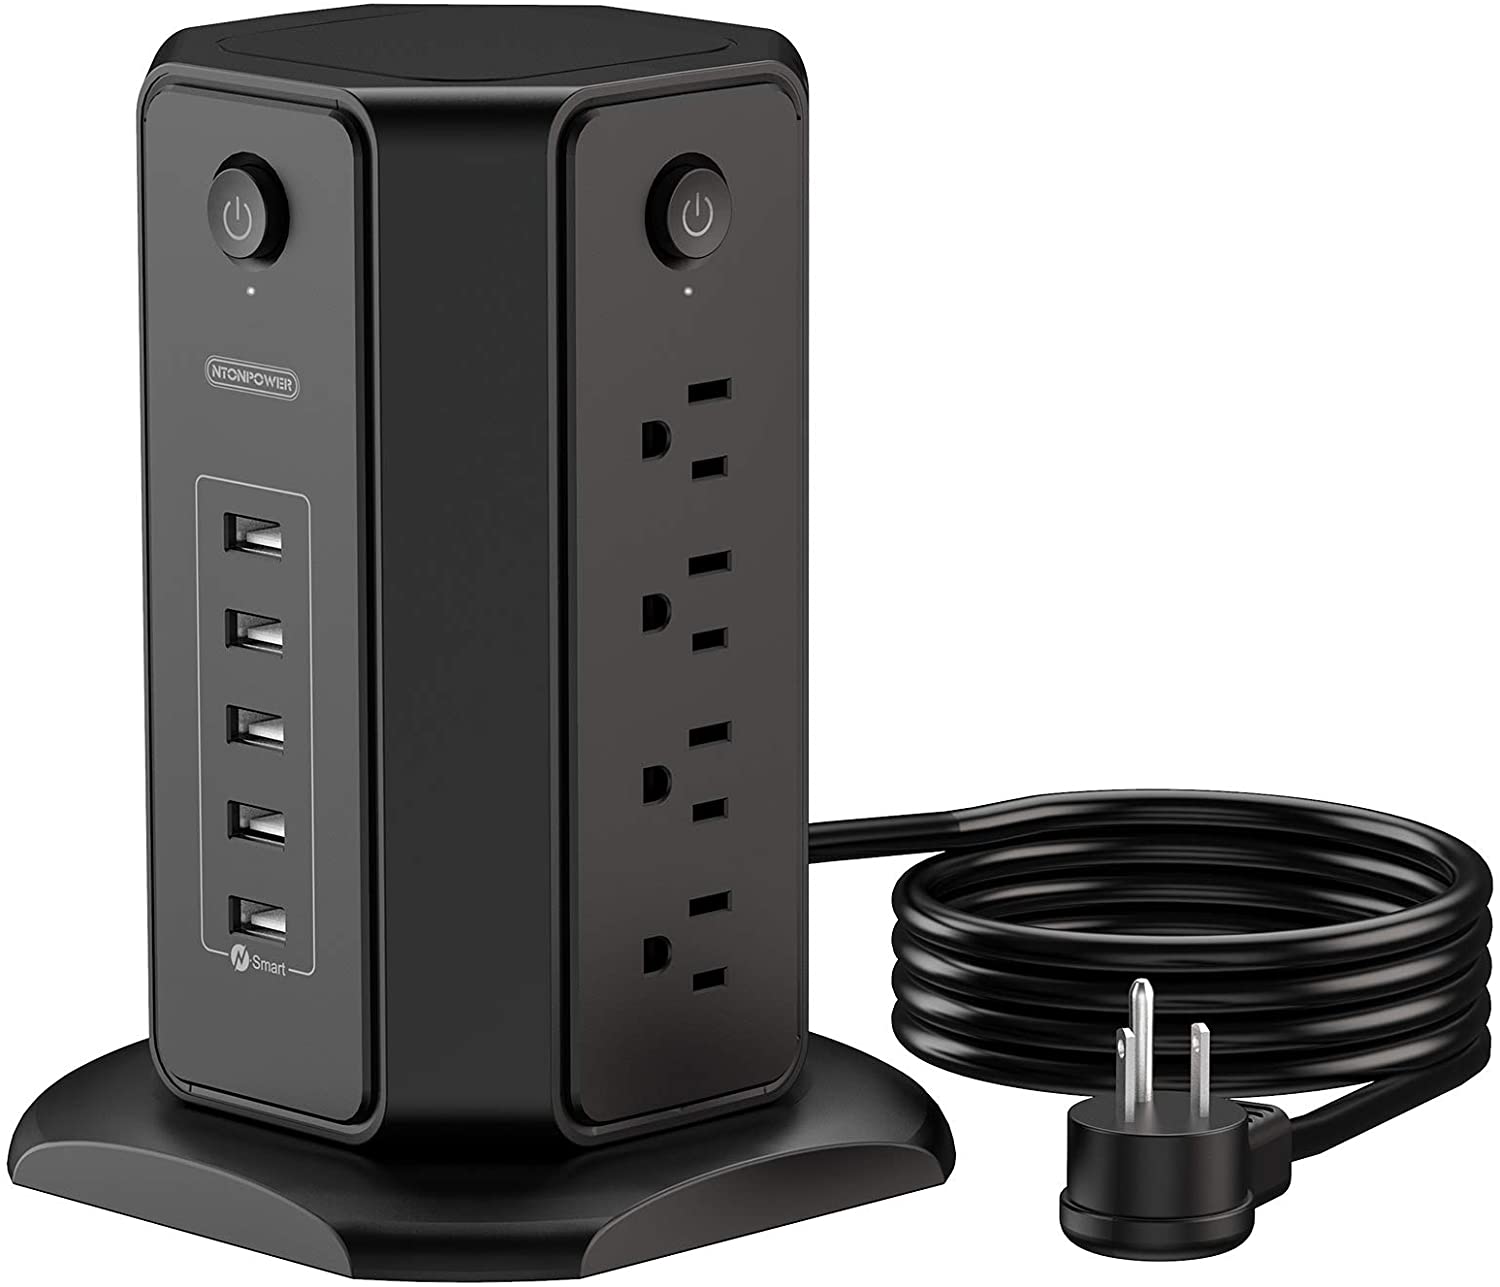 Ntonpower 1080J Surge Protector Power Strip Tower 8 Outlets 5 USB